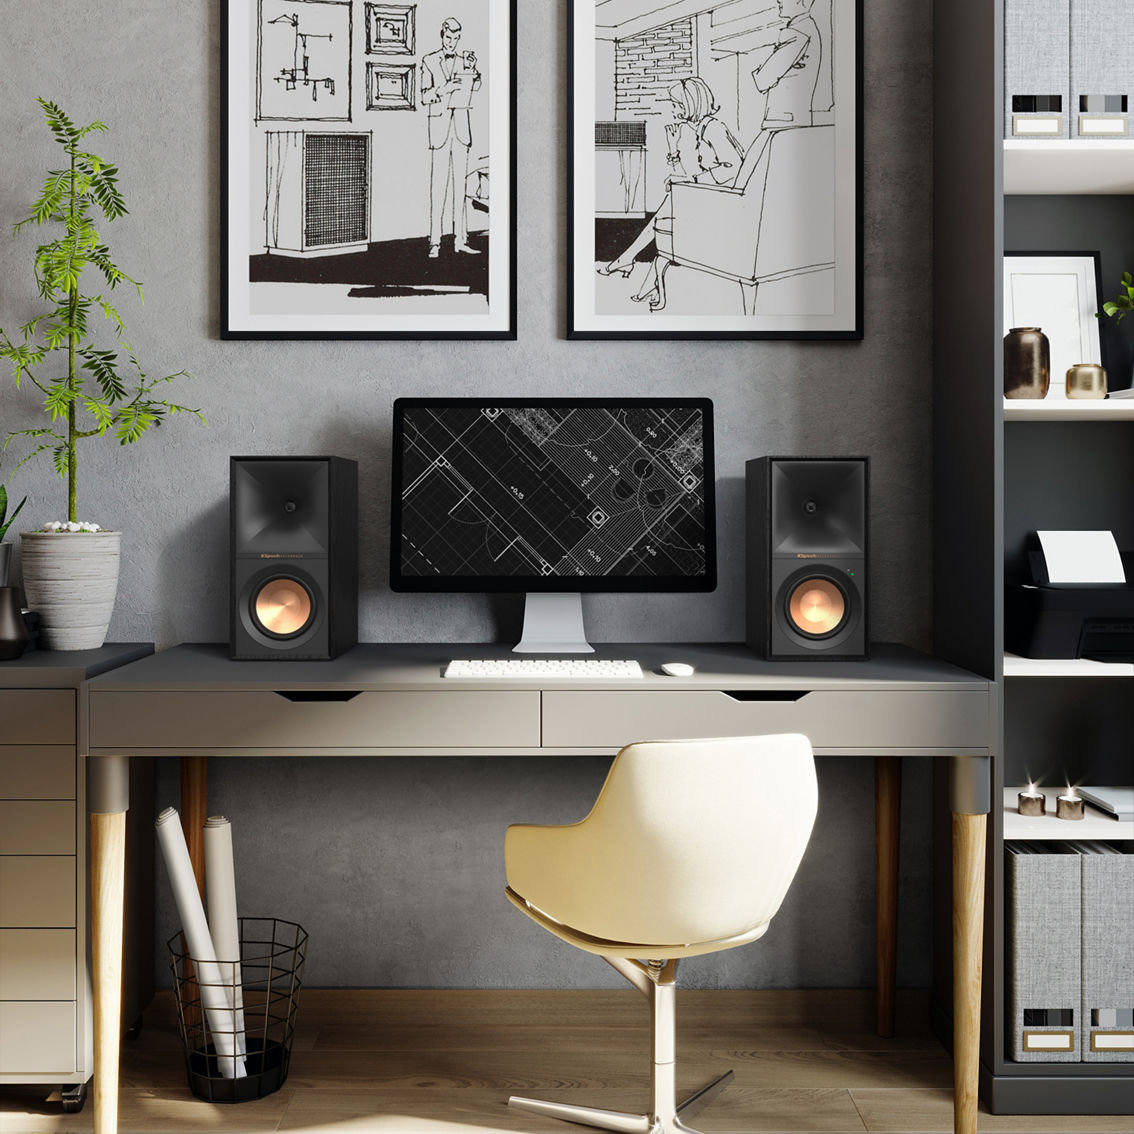 Klipsch R-50PM Powered Monitor Speakers with 5.25 in. Woofer - Image 8 of 8